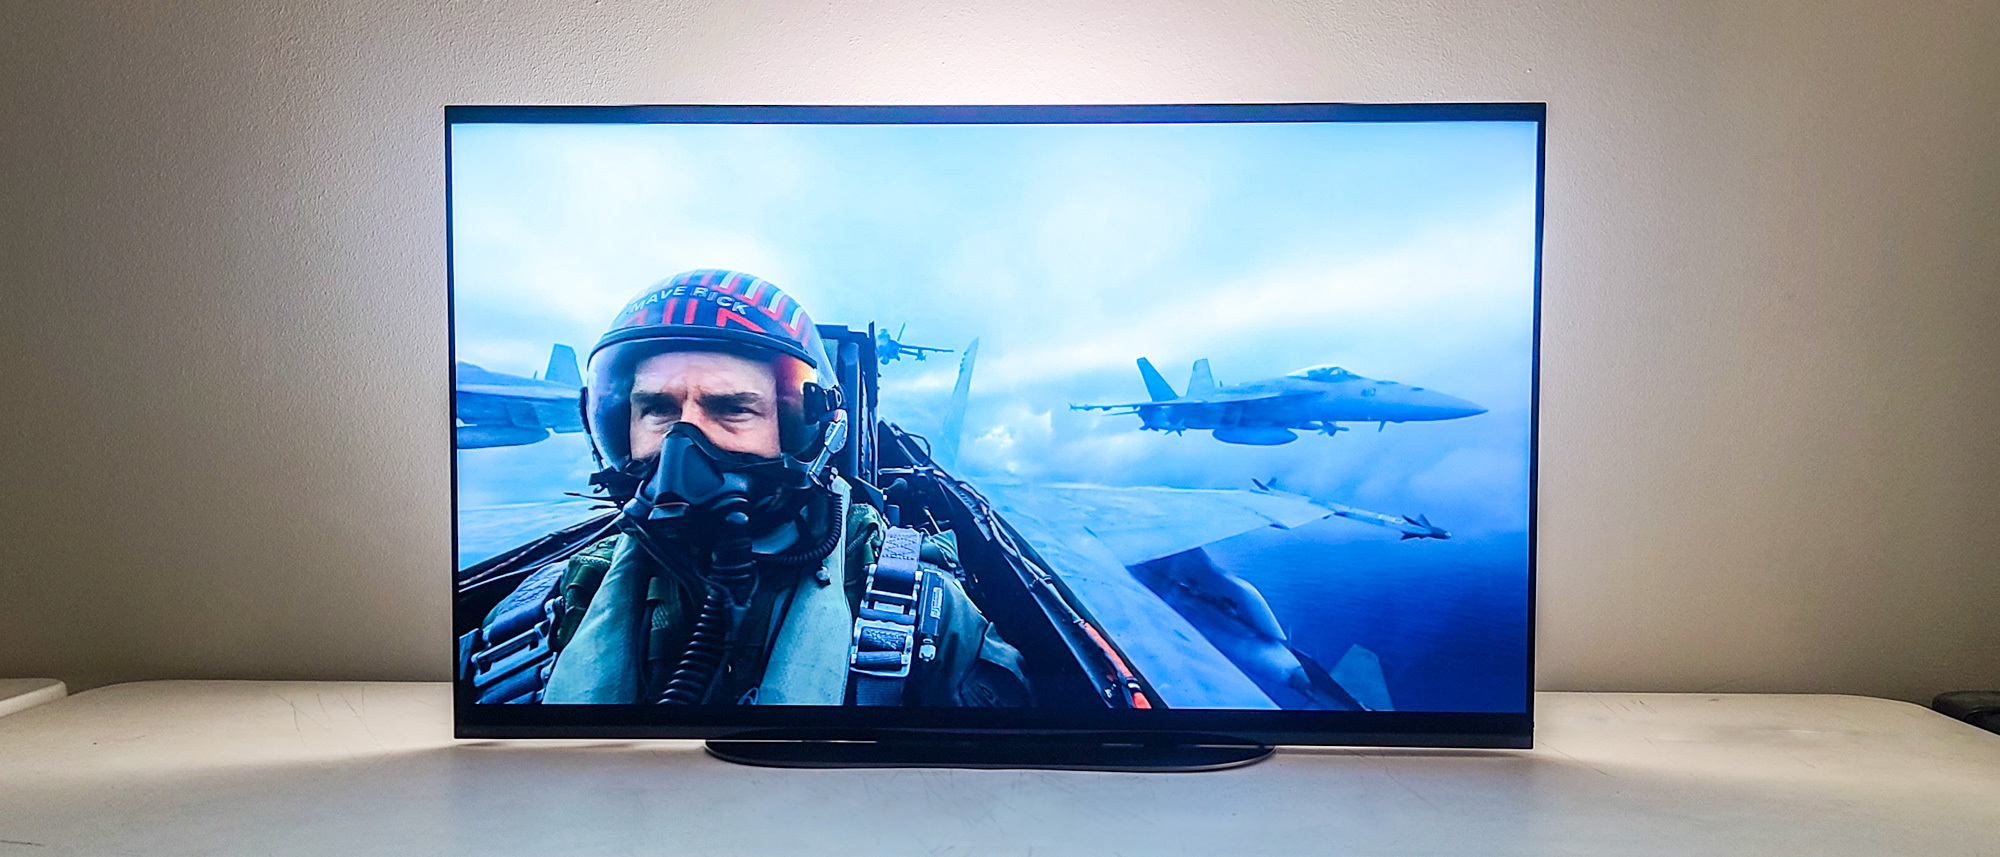 SONY 42-inch A90K Bravia XR OLED TV Review 4K PC Gaming Monitor : XR42A90K  